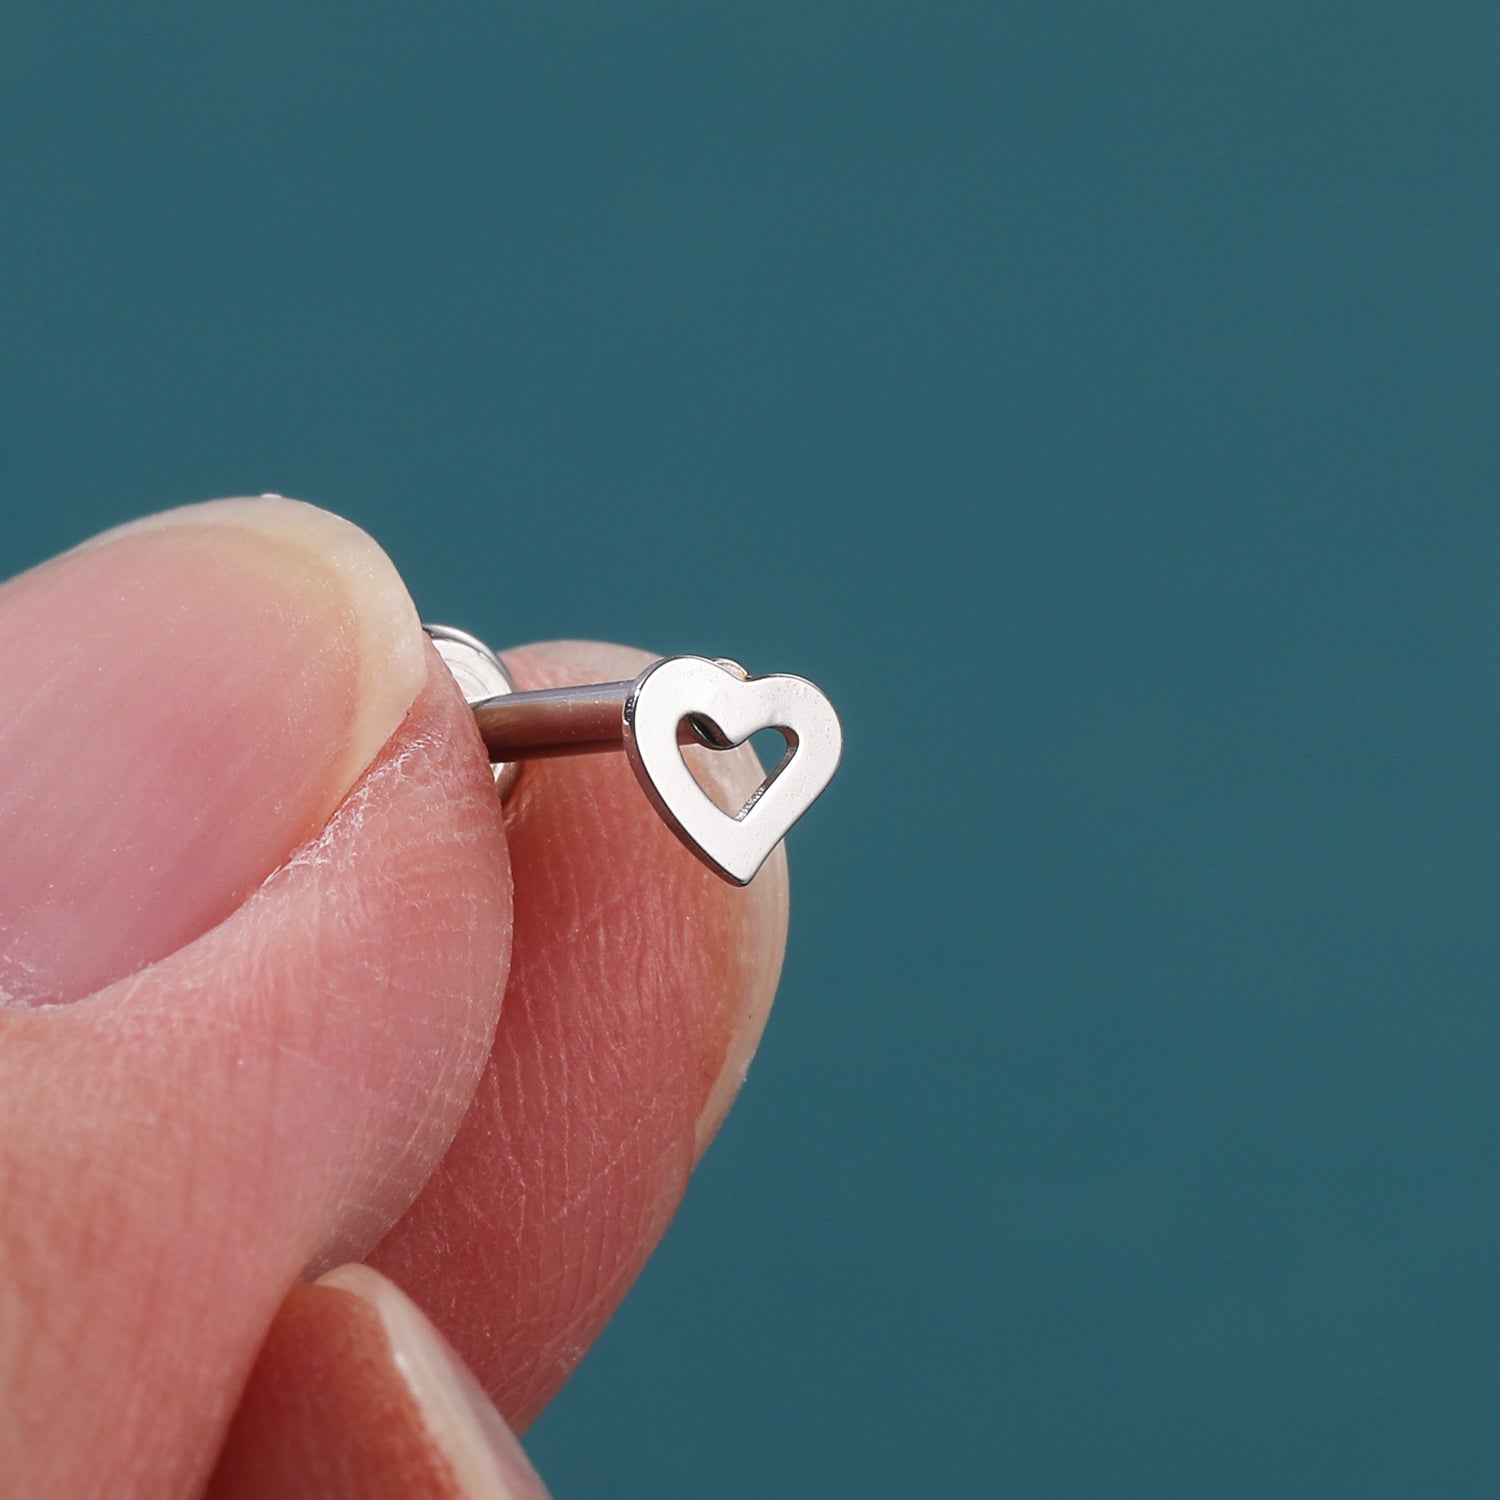 16g-heart-labret-rings-stainless-steel-tragus-helix-conch-piercing